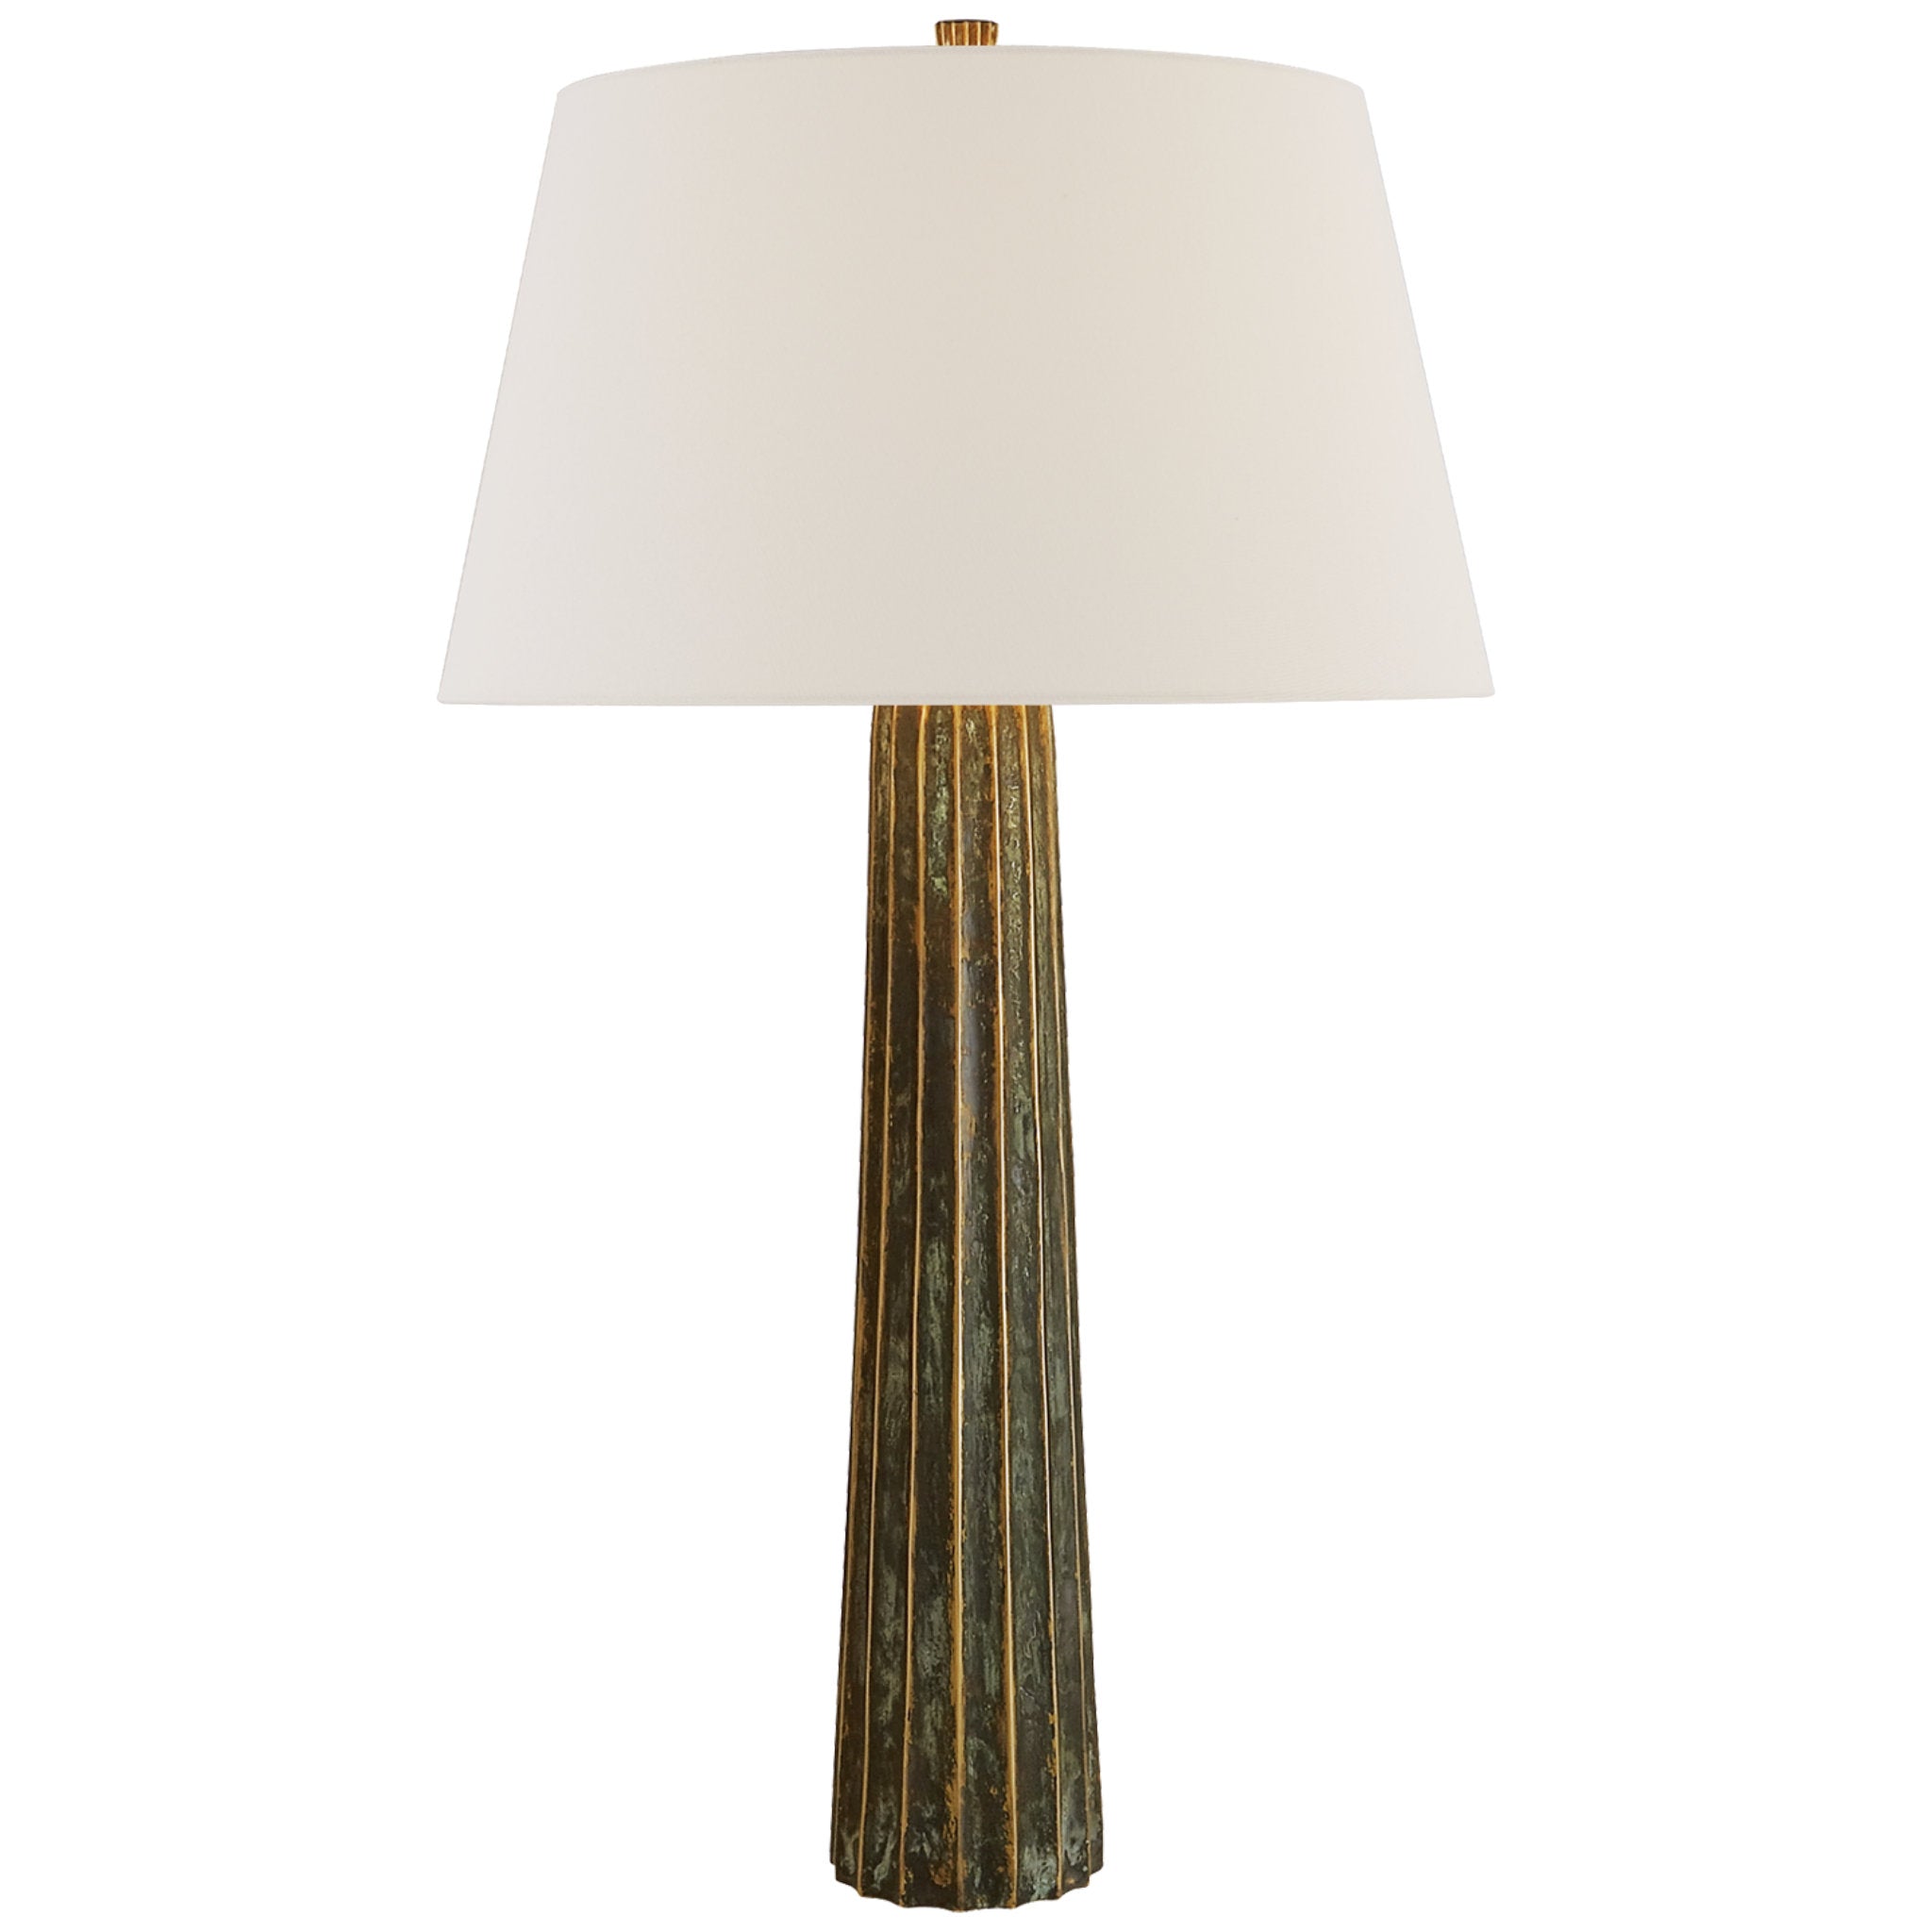 Chapman & Myers Fluted Spire Large Table Lamp in Bronze with Verdigris Highlights with Linen Shade